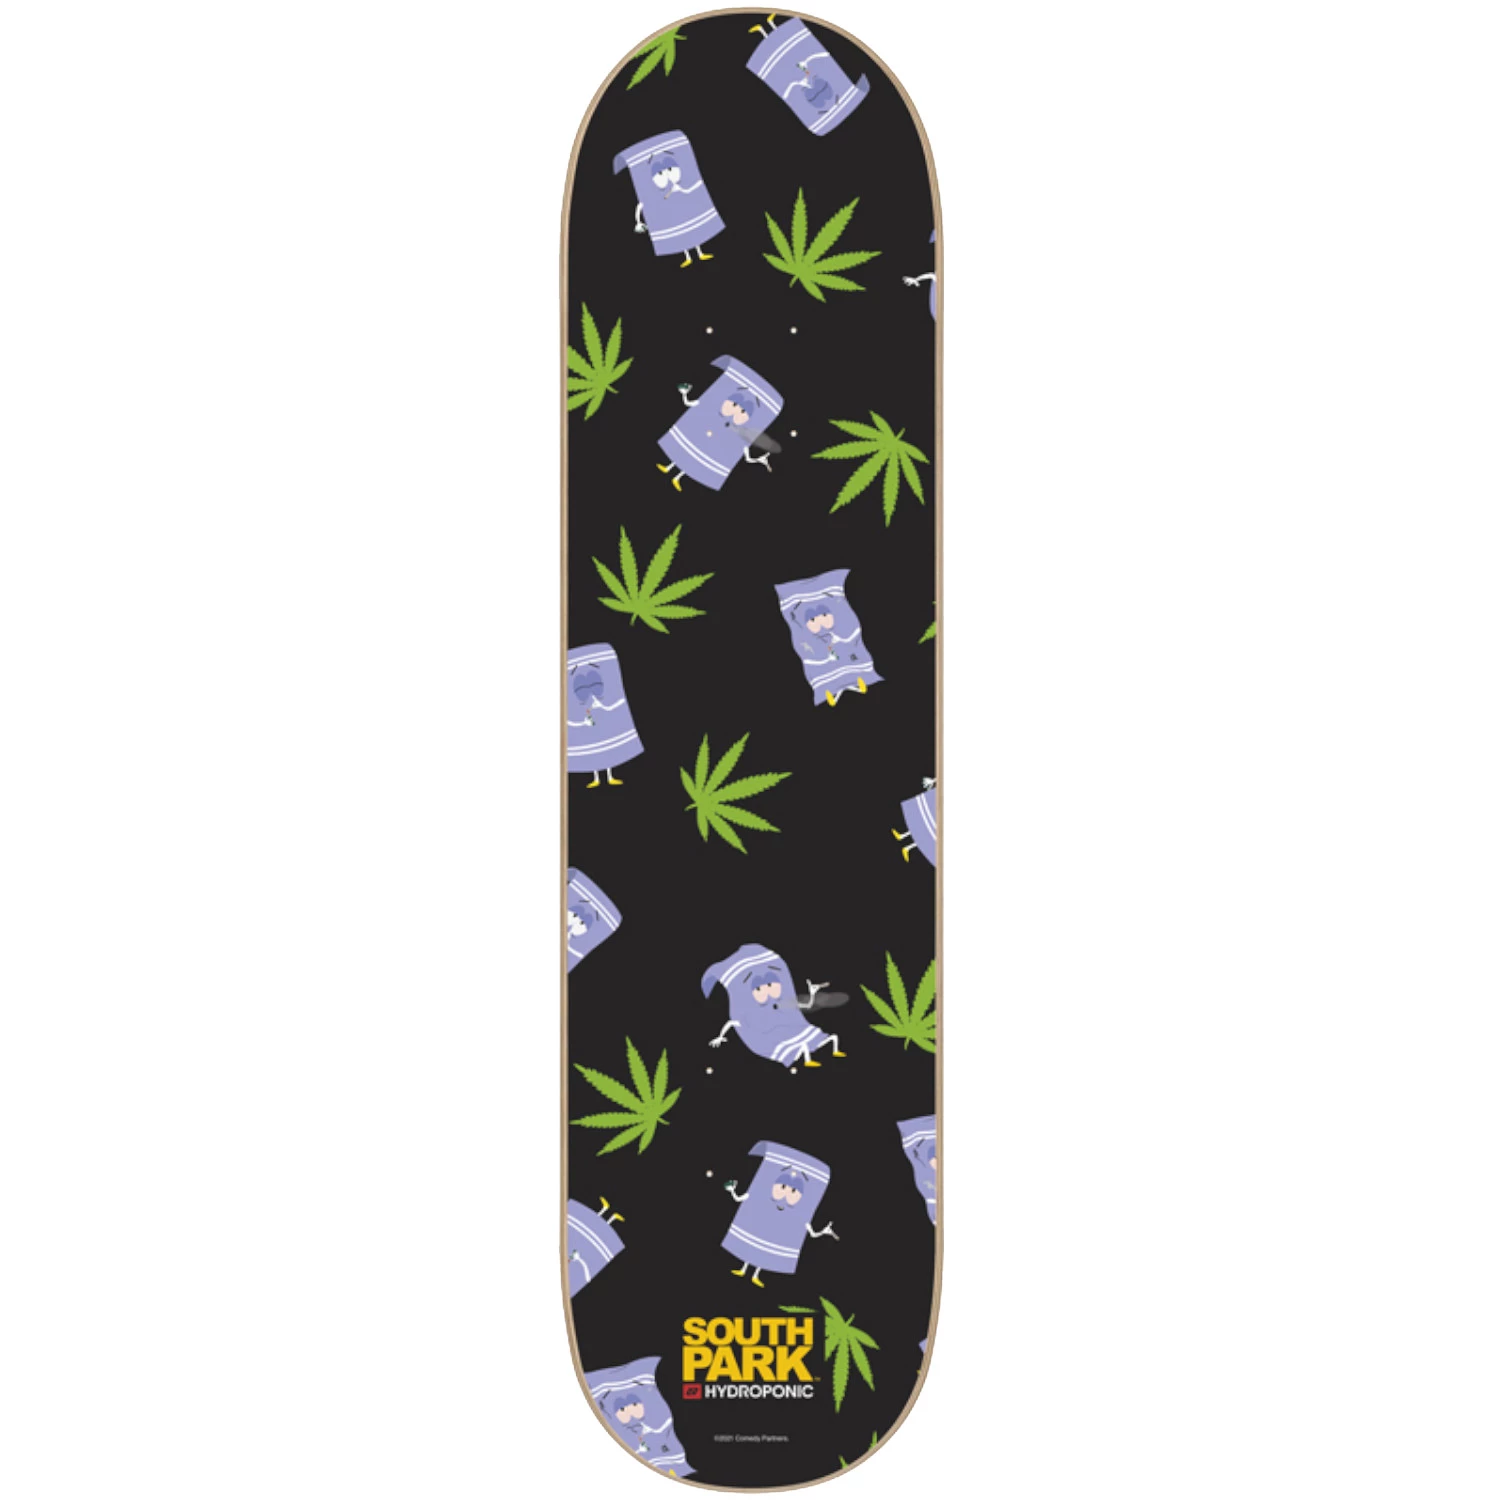 Hydroponic South Park Collab Towelie 8.0 skateboard deck